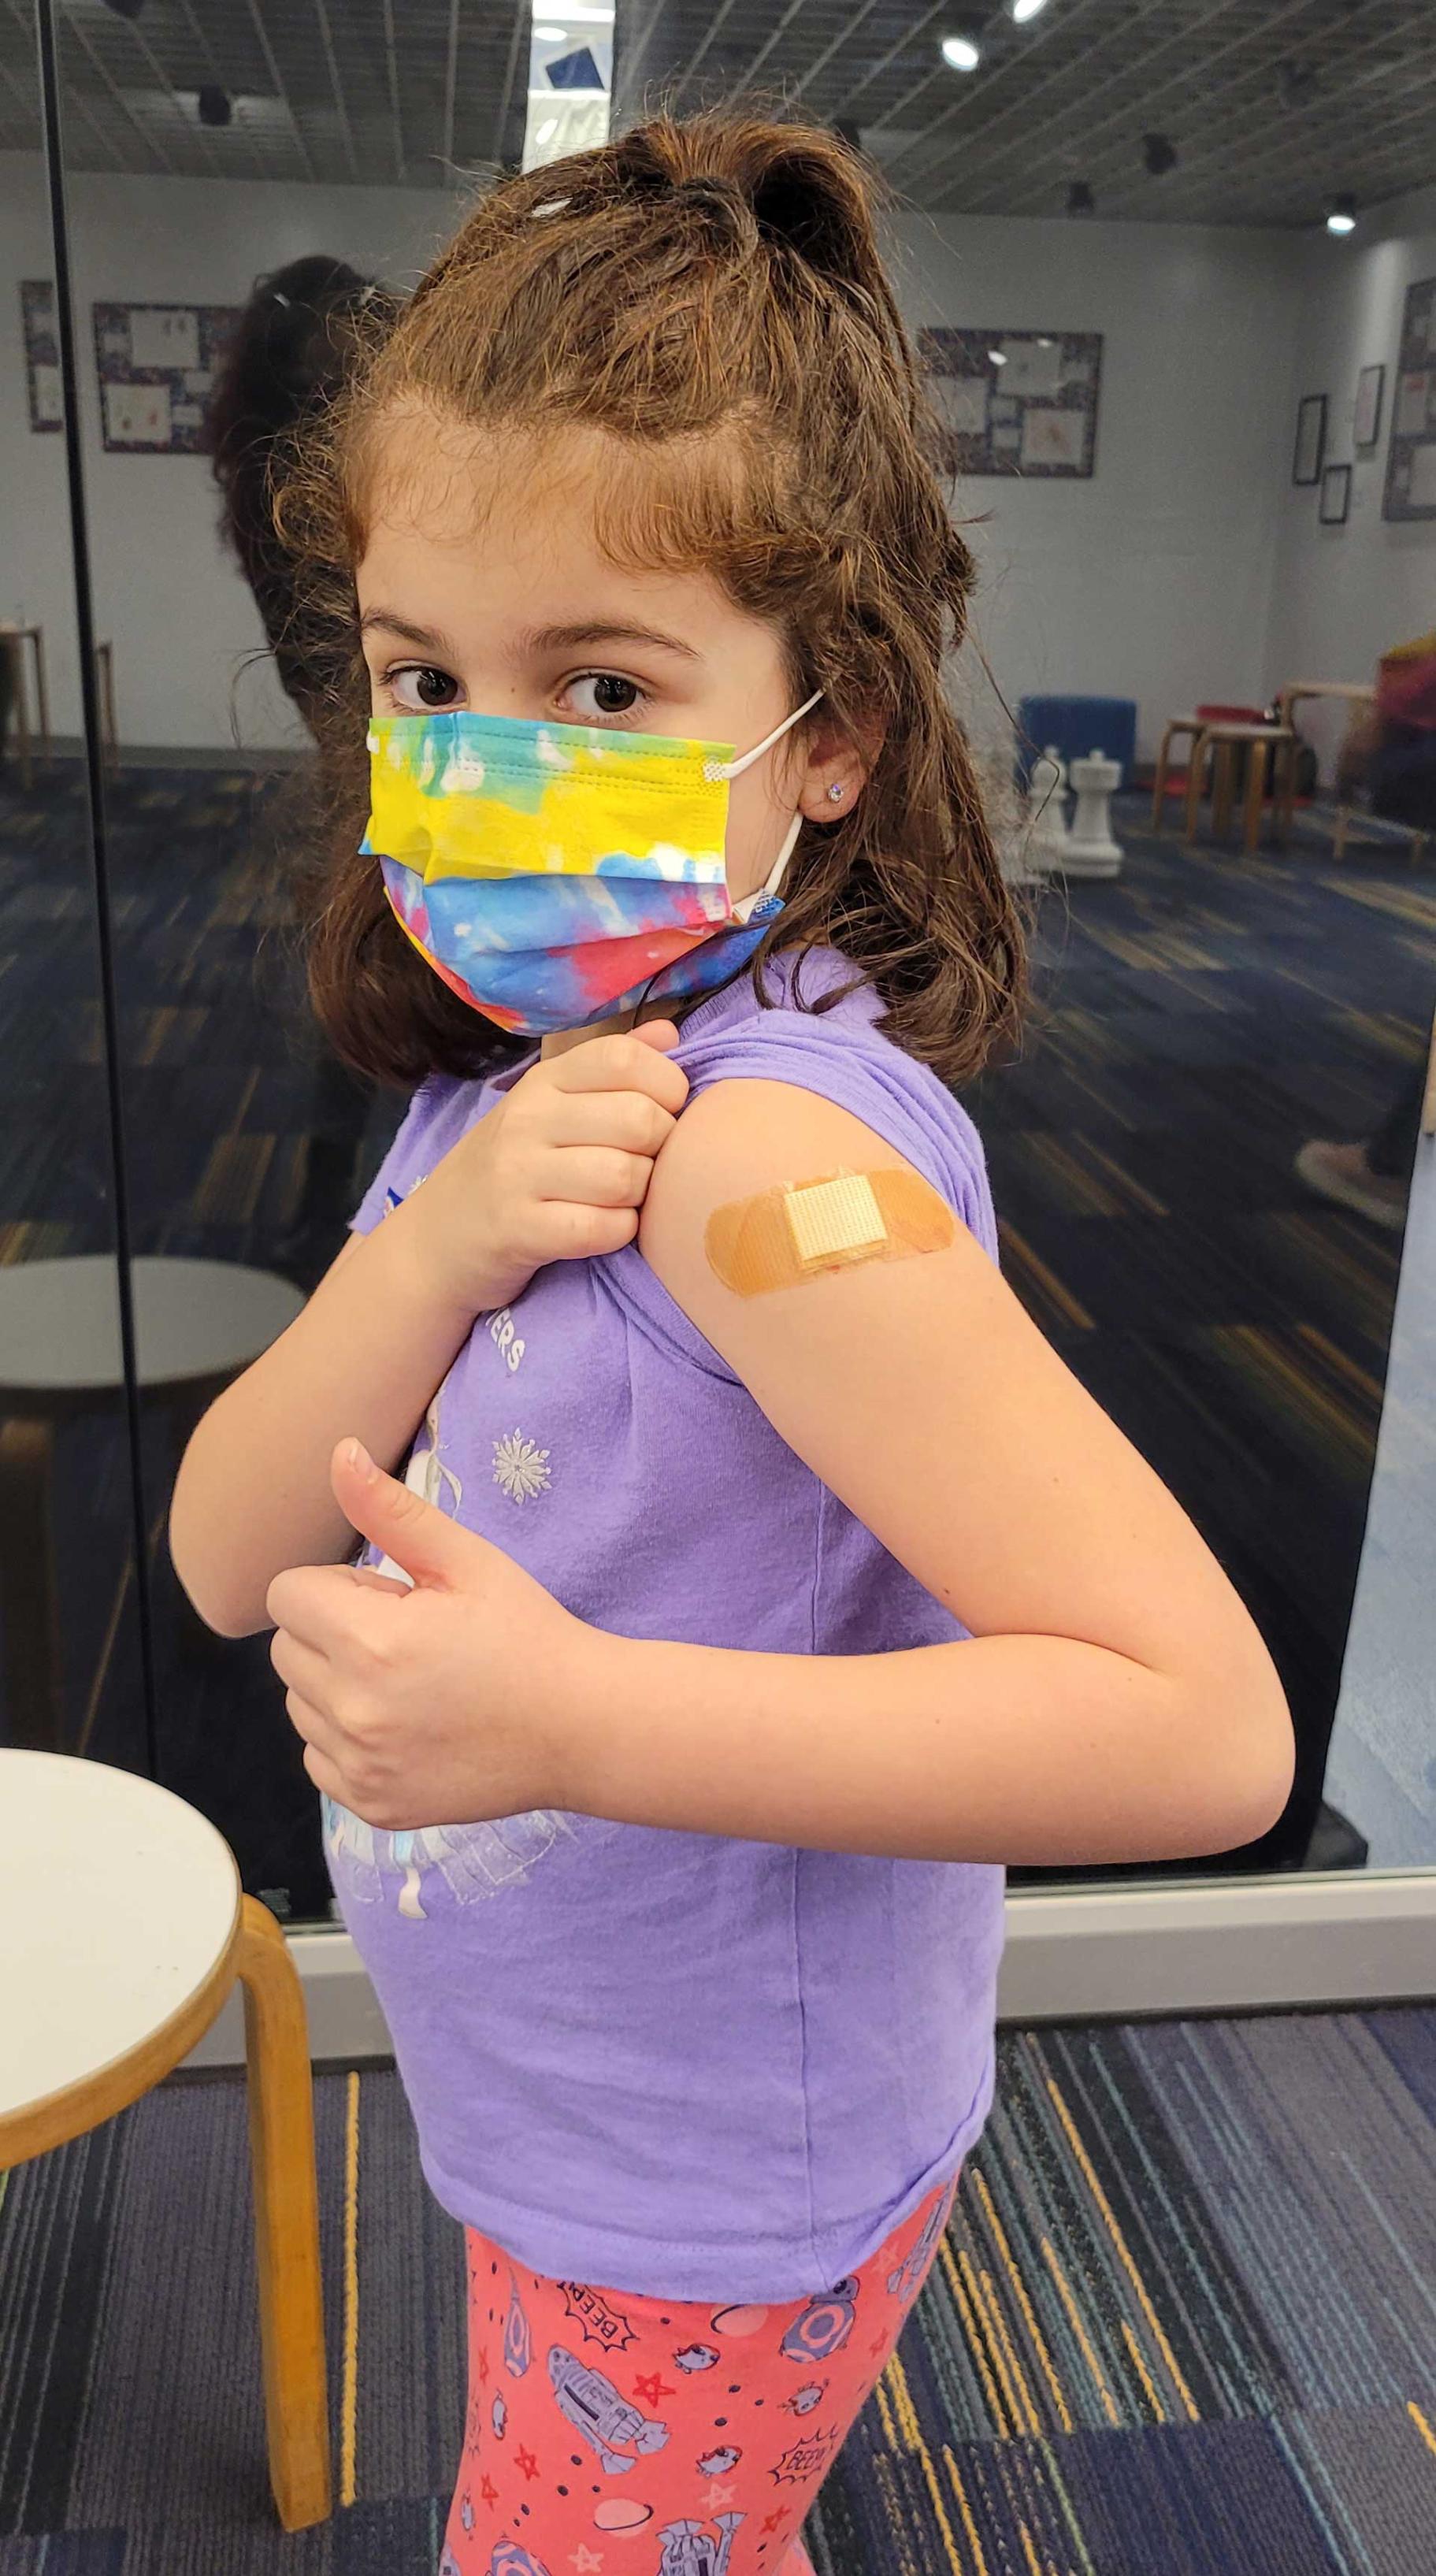 a young girl shows the band-aid on her arm where she just received a vaccination